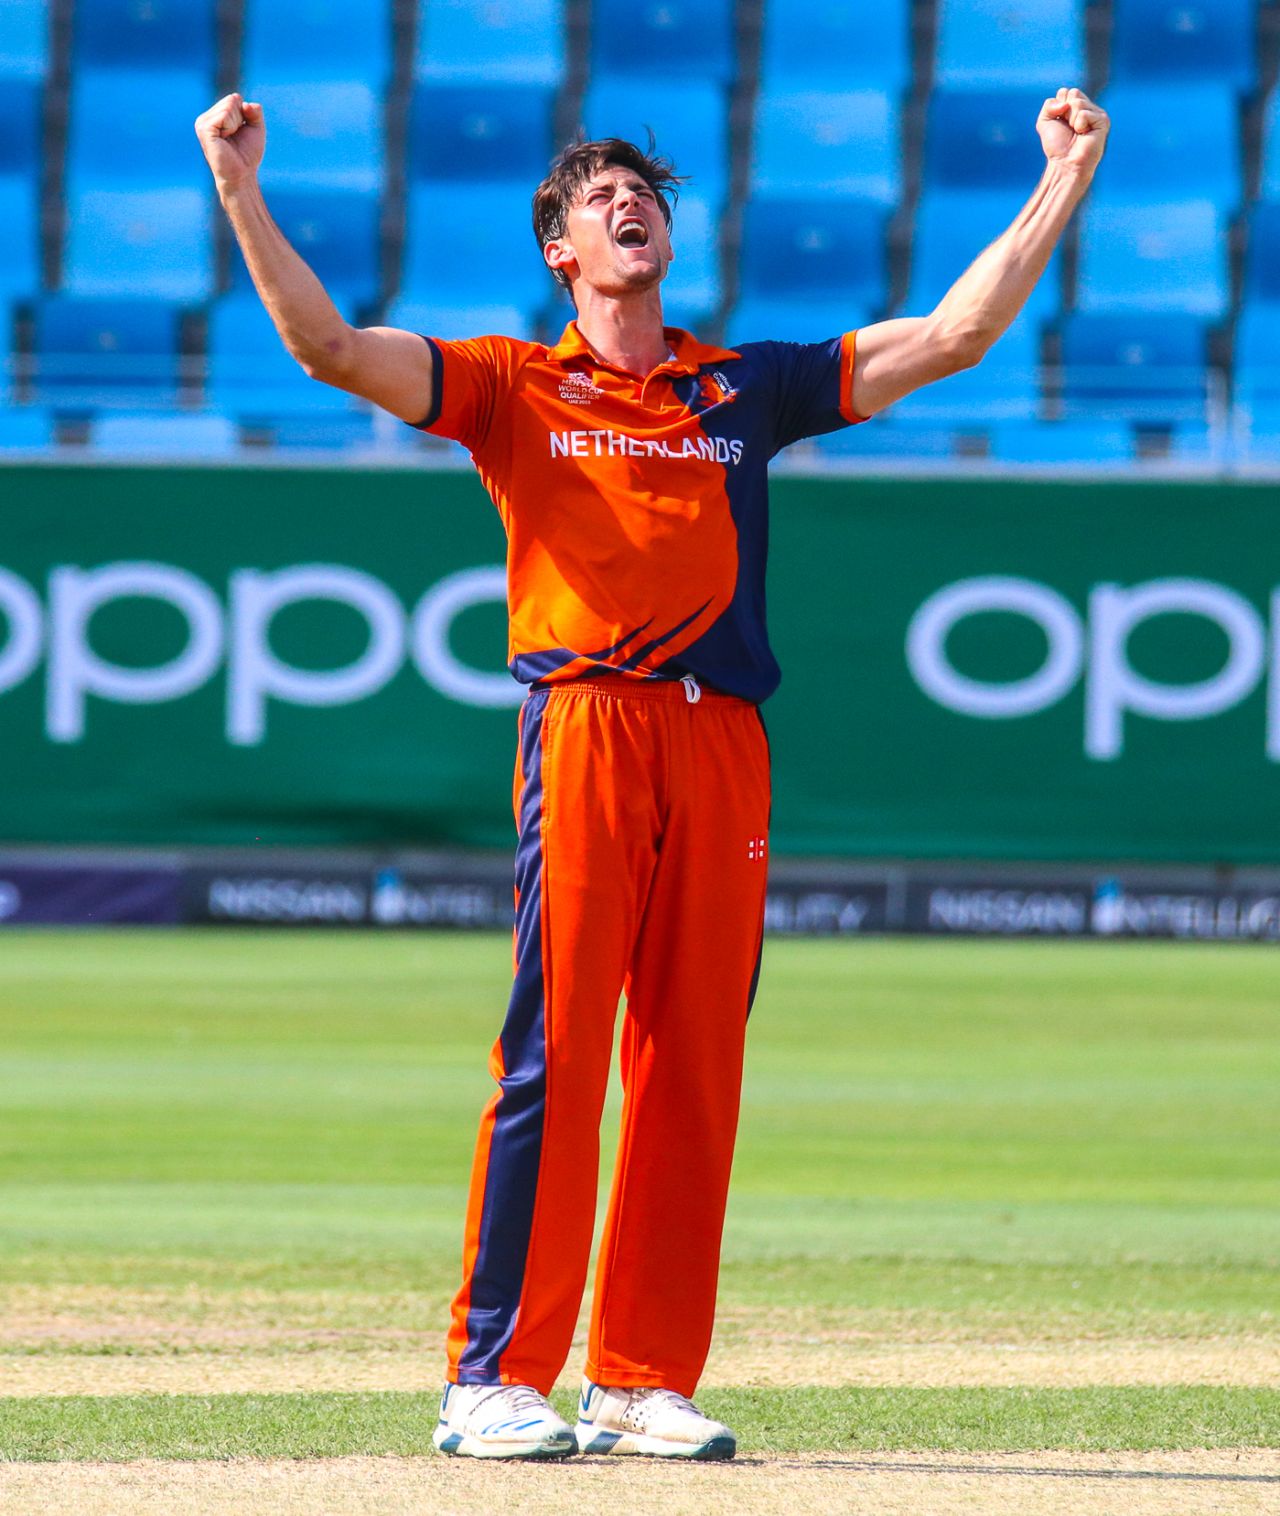 Brandon Glover lets out a roar to celebrate his first wicket, UAE v Netherlands, ICC Men's T20 World Cup Qualifier playoffs, Dubai, October 29, 2019